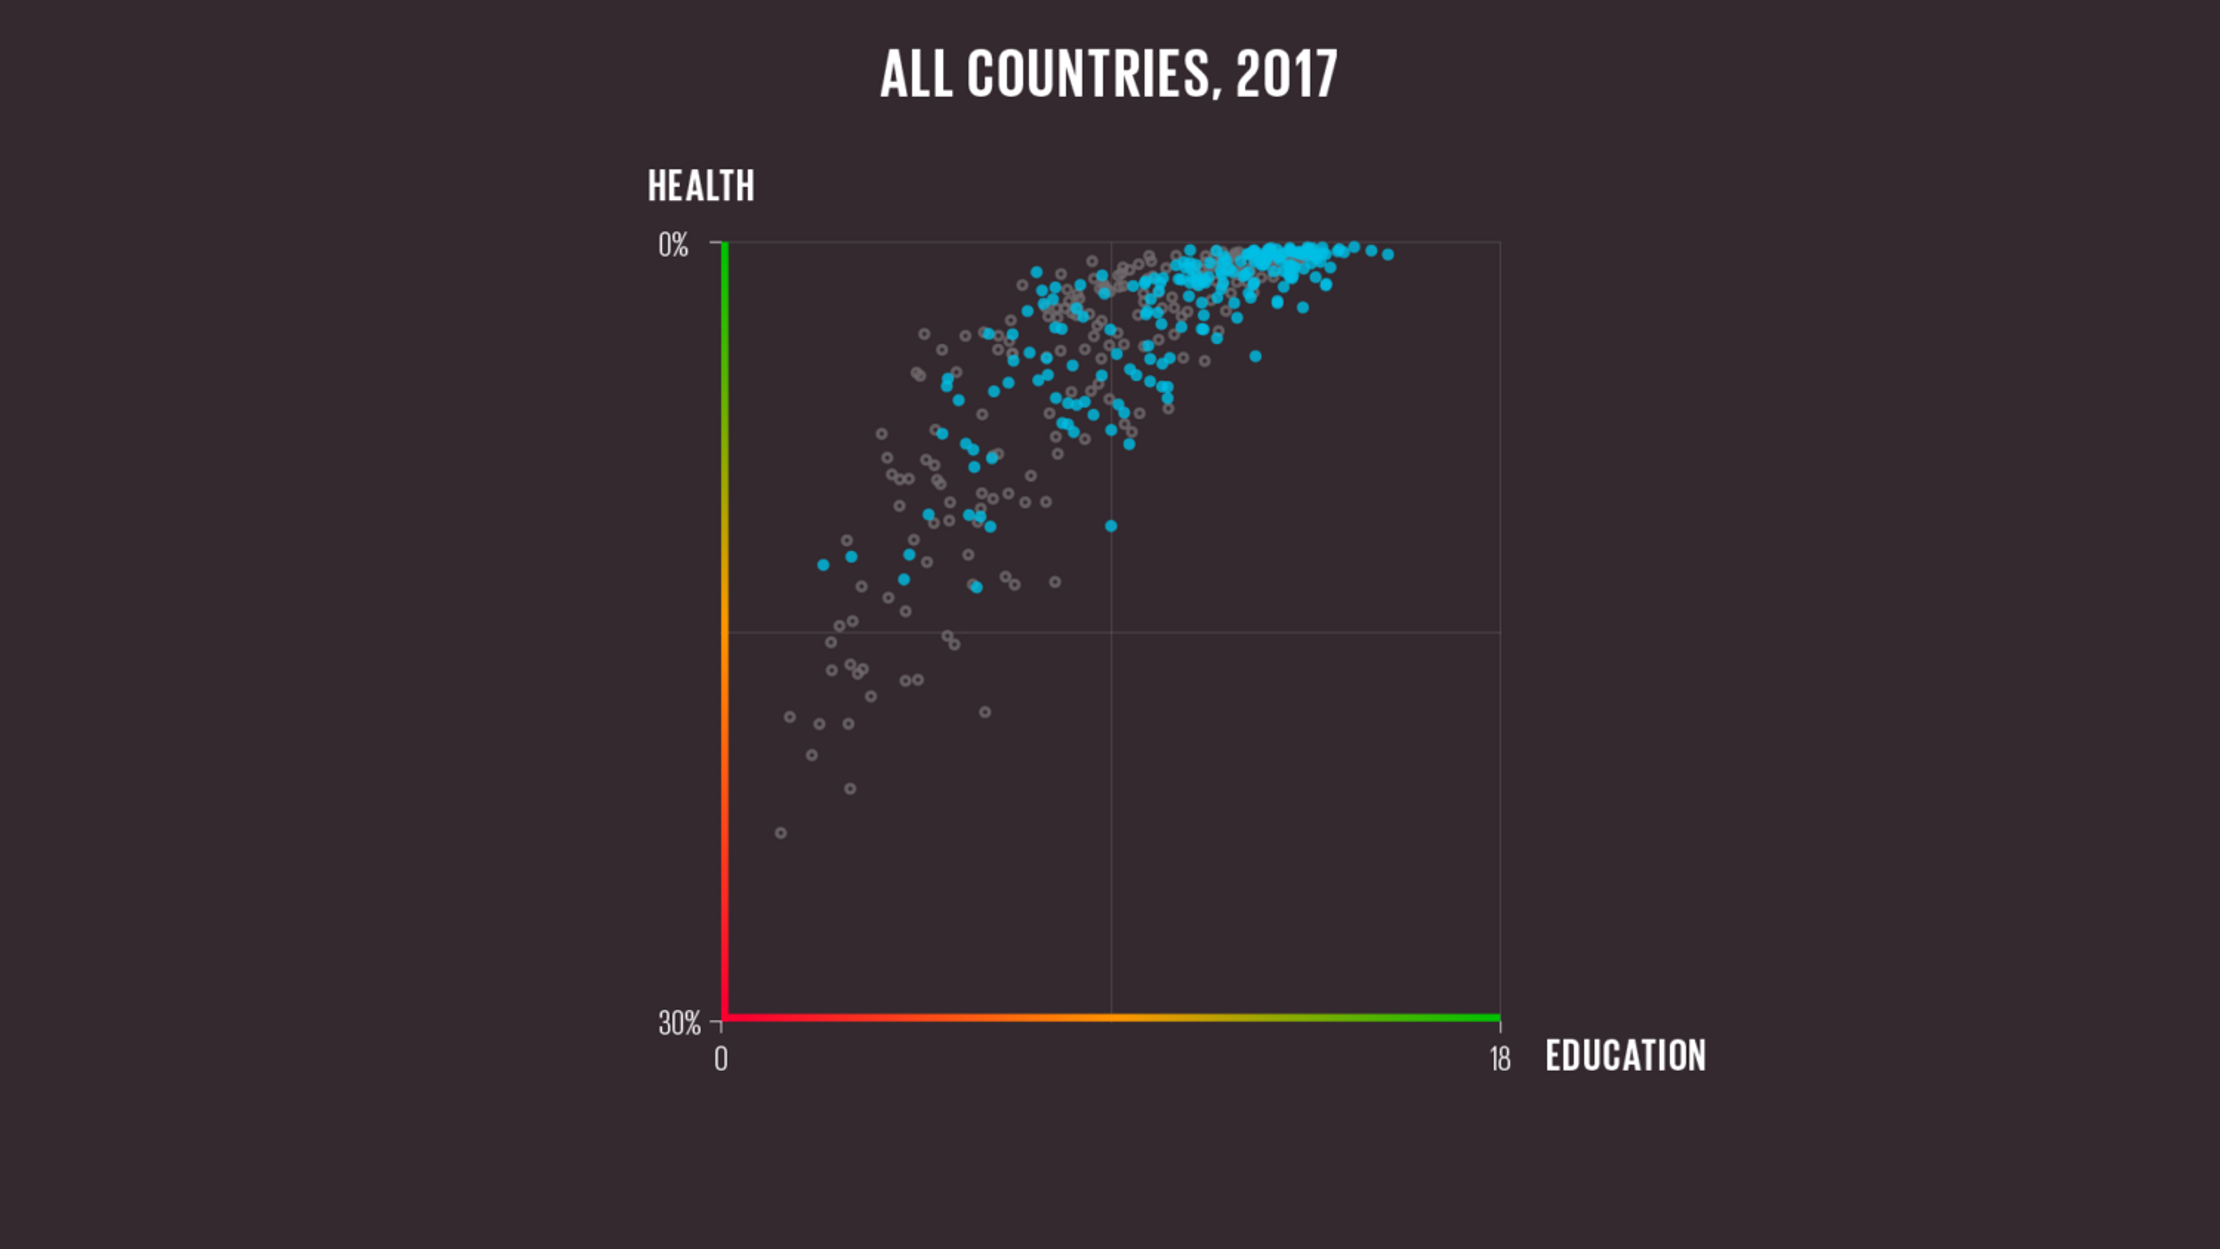 A scatter plot showing the percentage of children that die before the age of five on the y-axis which spans 0% at the top to 30% at the bottom. The x-axis shows years of education from 0 to 18. The dots represent countries in 2017 with the majority slowly moving towards the favourable zone in the rop right.